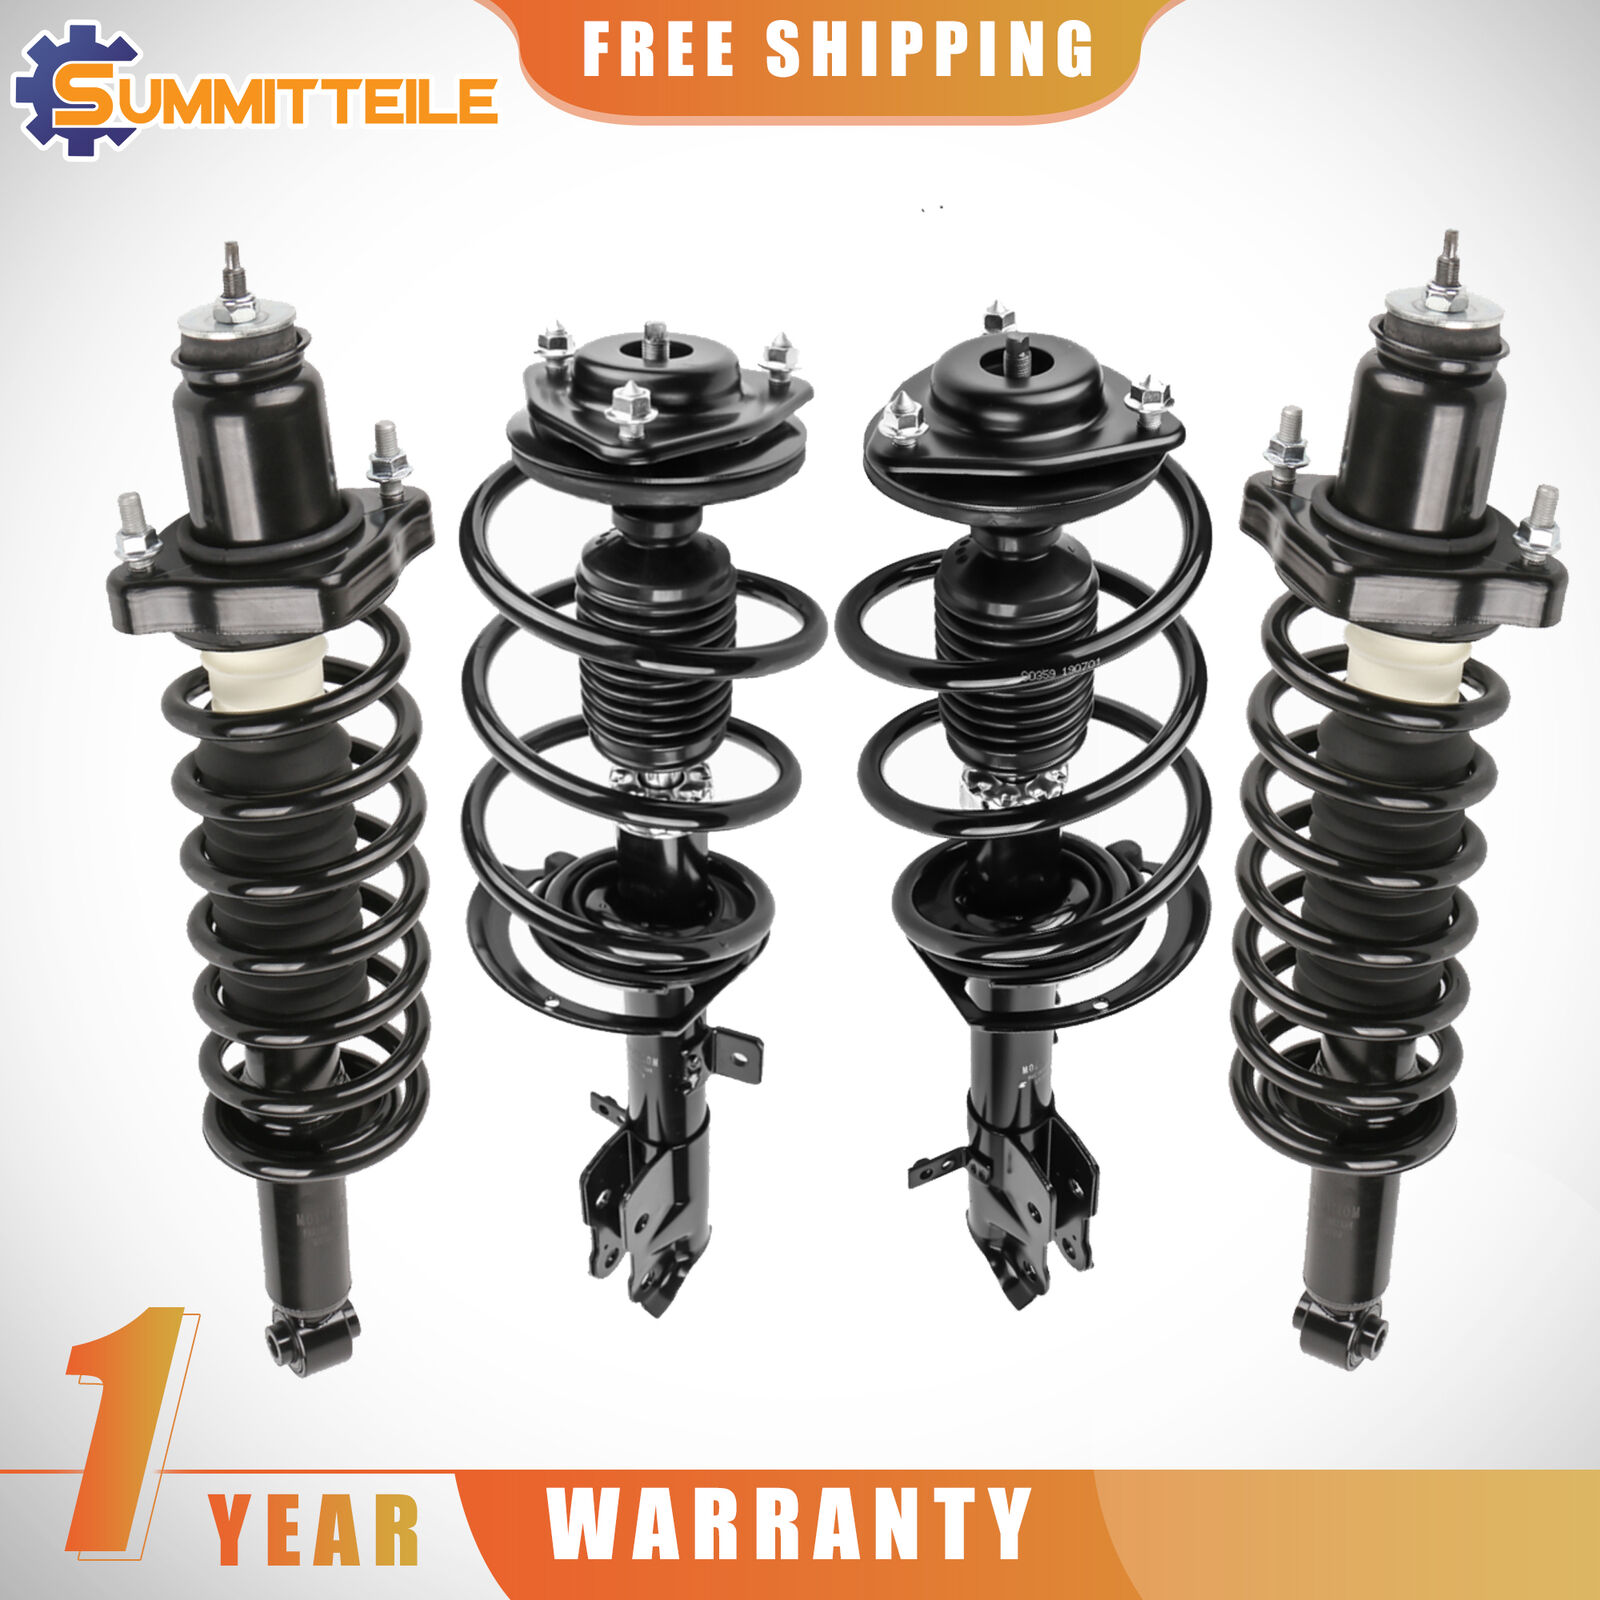 4PCS Front & Rear Struts Shock Absorbers For Jeep Compass Patriot Dodge Caliber